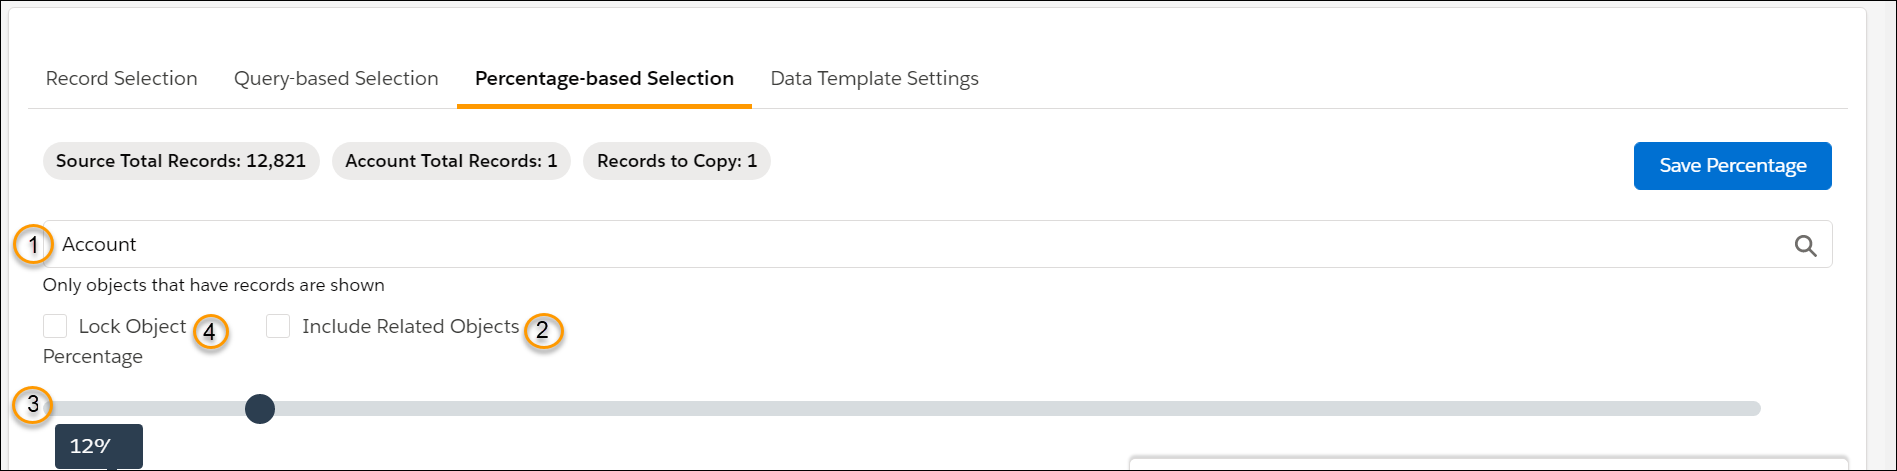 Salesforce_App_Data_Template_Percentage_Selection.png